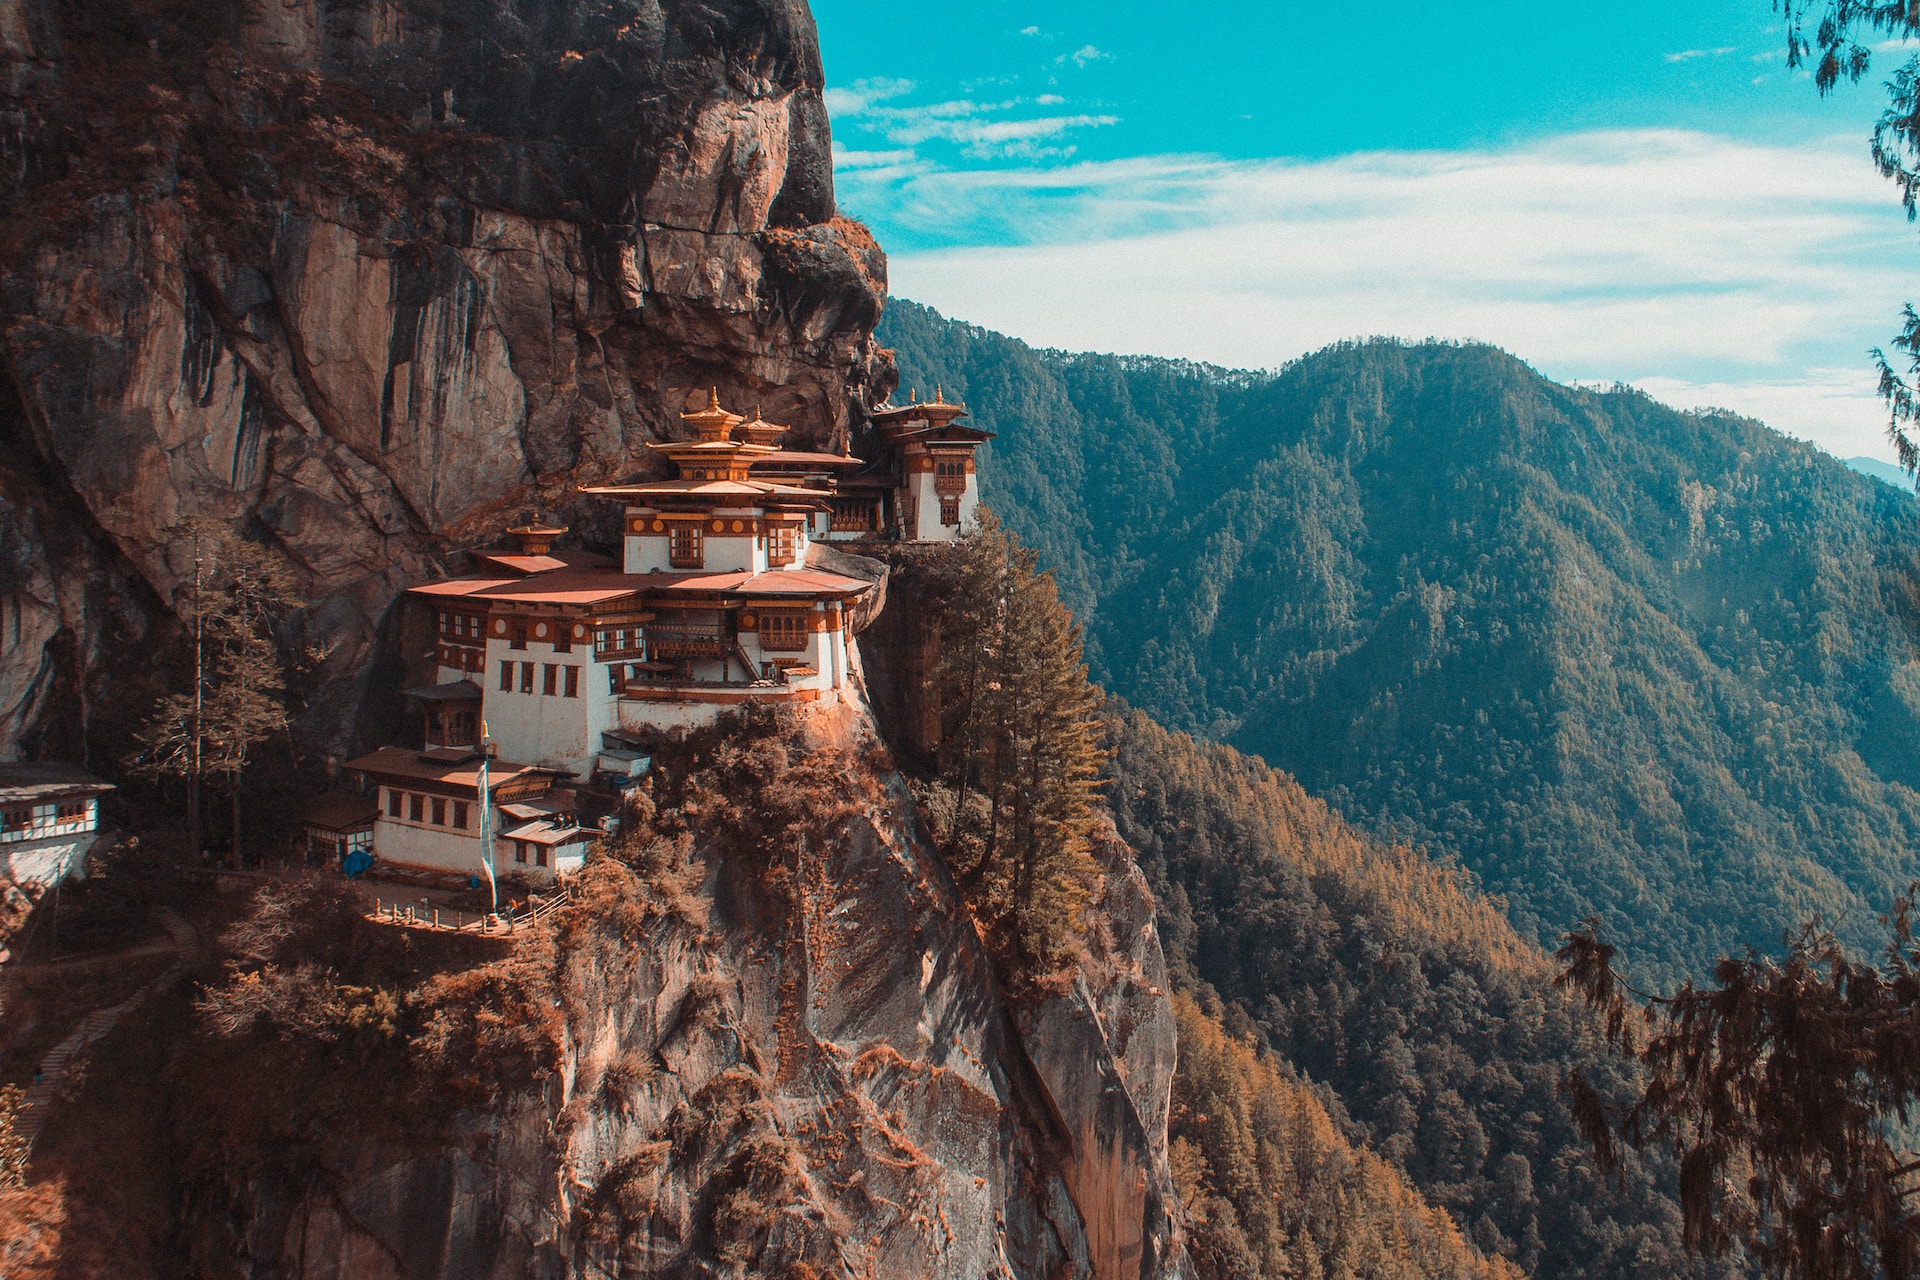 Geek insider, geekinsider, geekinsider. Com,, bhutan invested millions in bitcoin, crypto currency